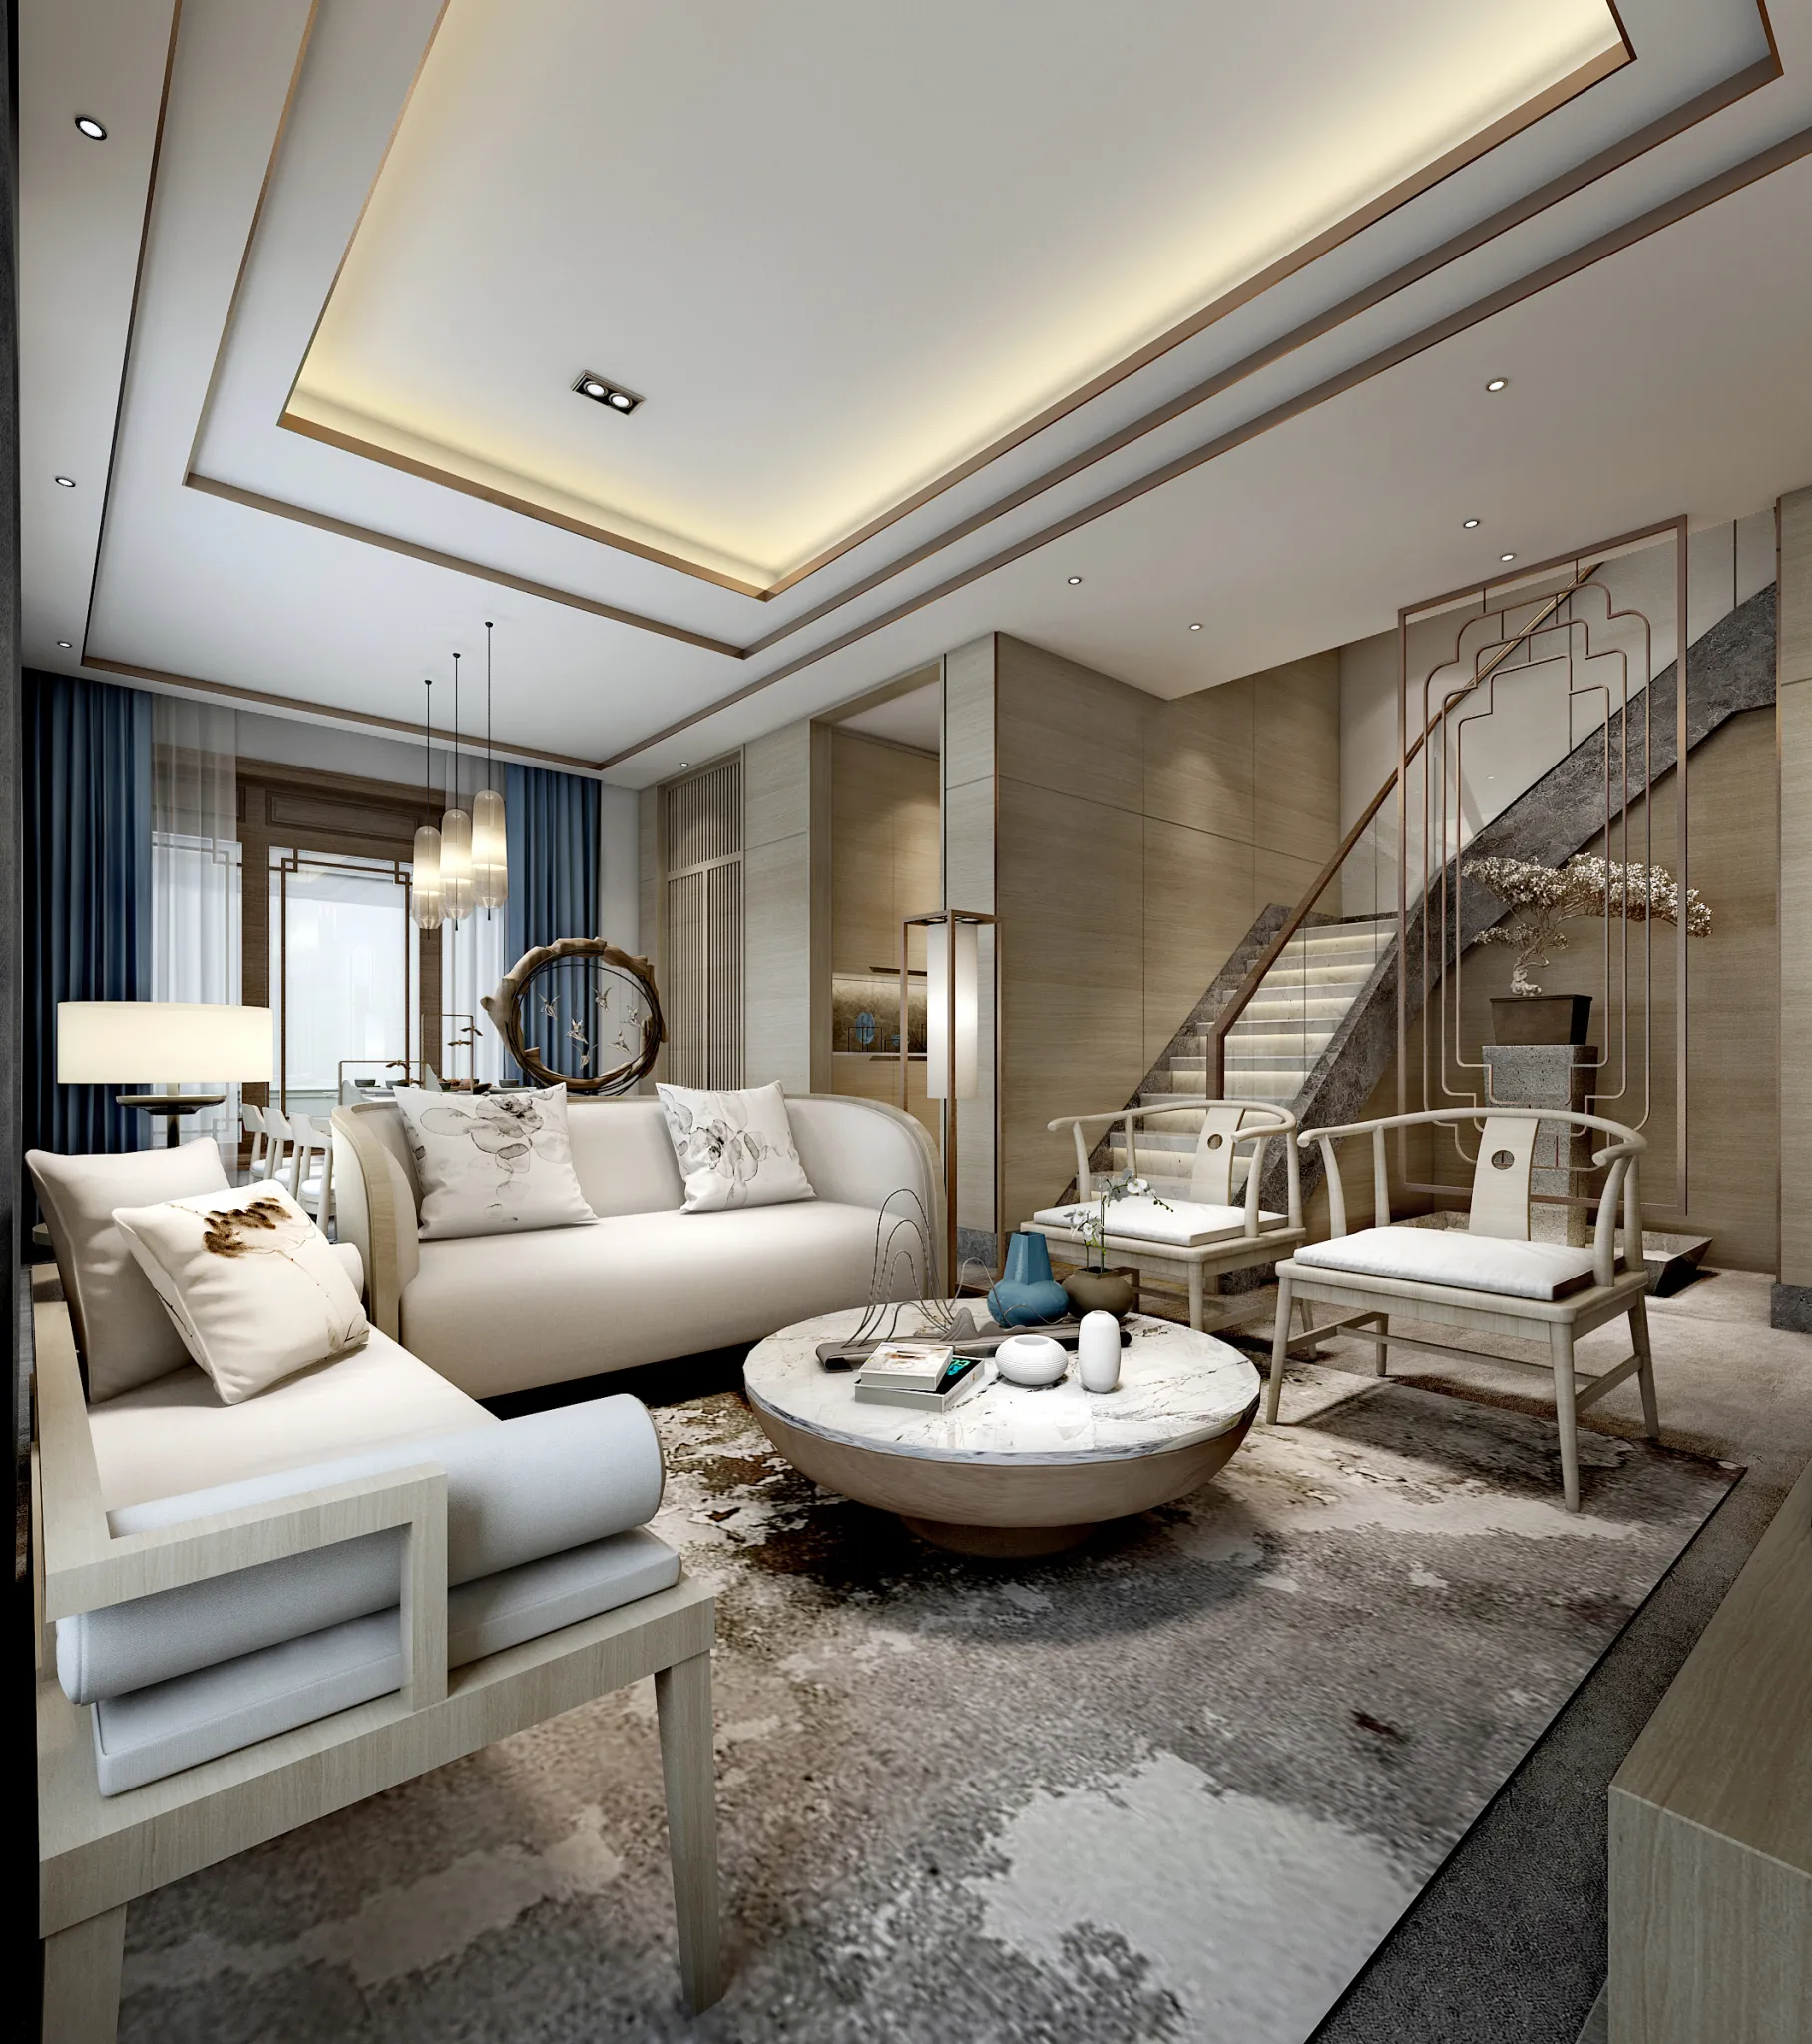 DESMOD INTERIOR 2021 (VRAY) – 4. LIVING ROOM – CHINESE – 008